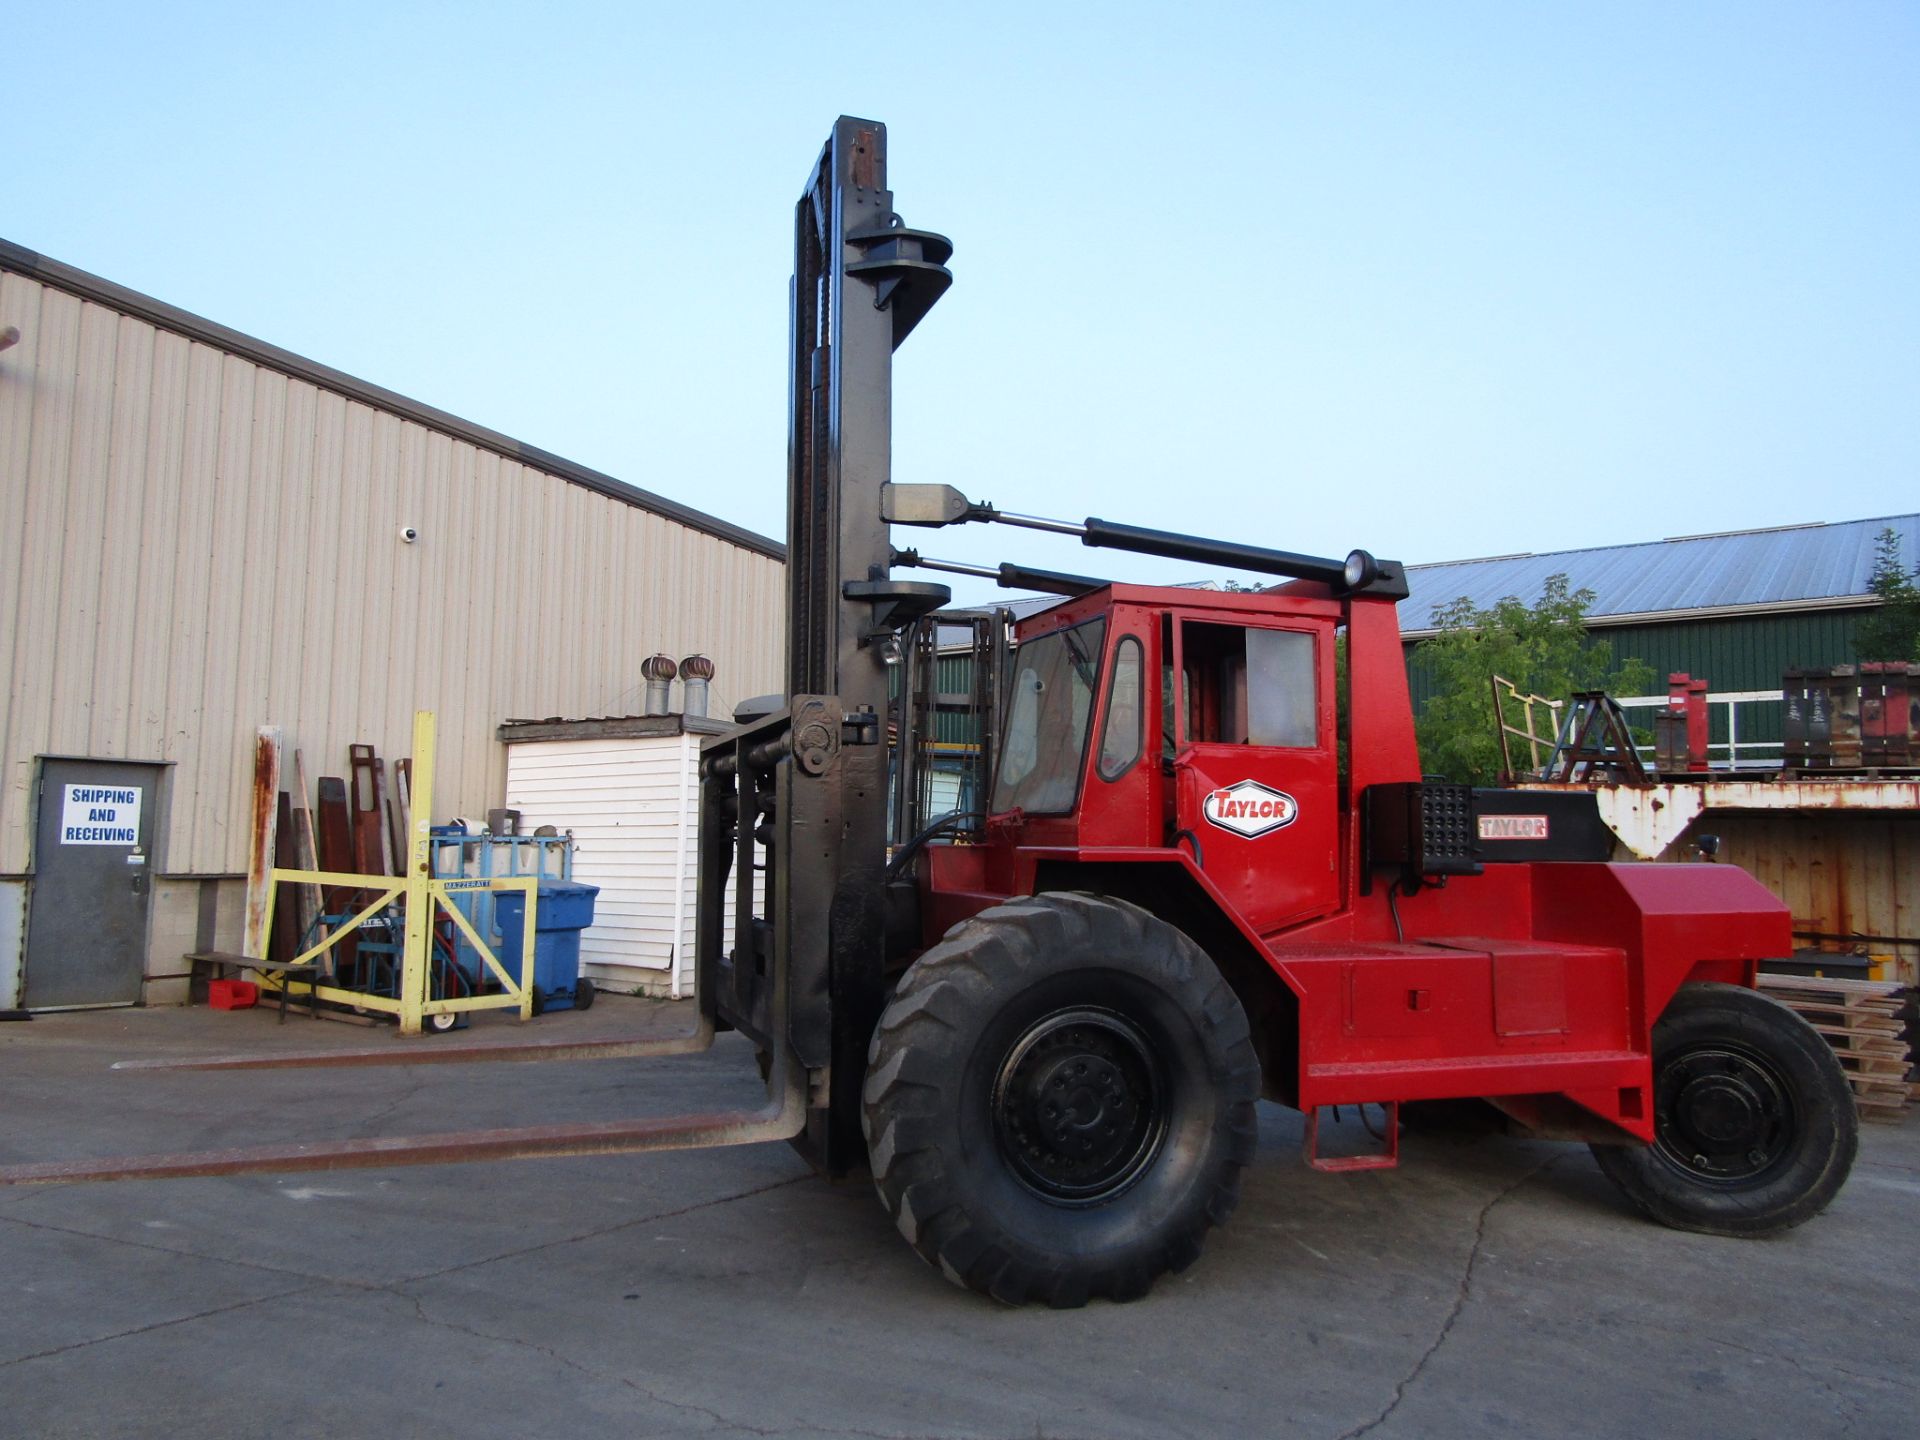 FREE CUSTOMS DOCS & 0 DUTY FEES - Taylor 22000lbs Capacity Forklift OUTDOOR Diesel Powered - Image 2 of 4